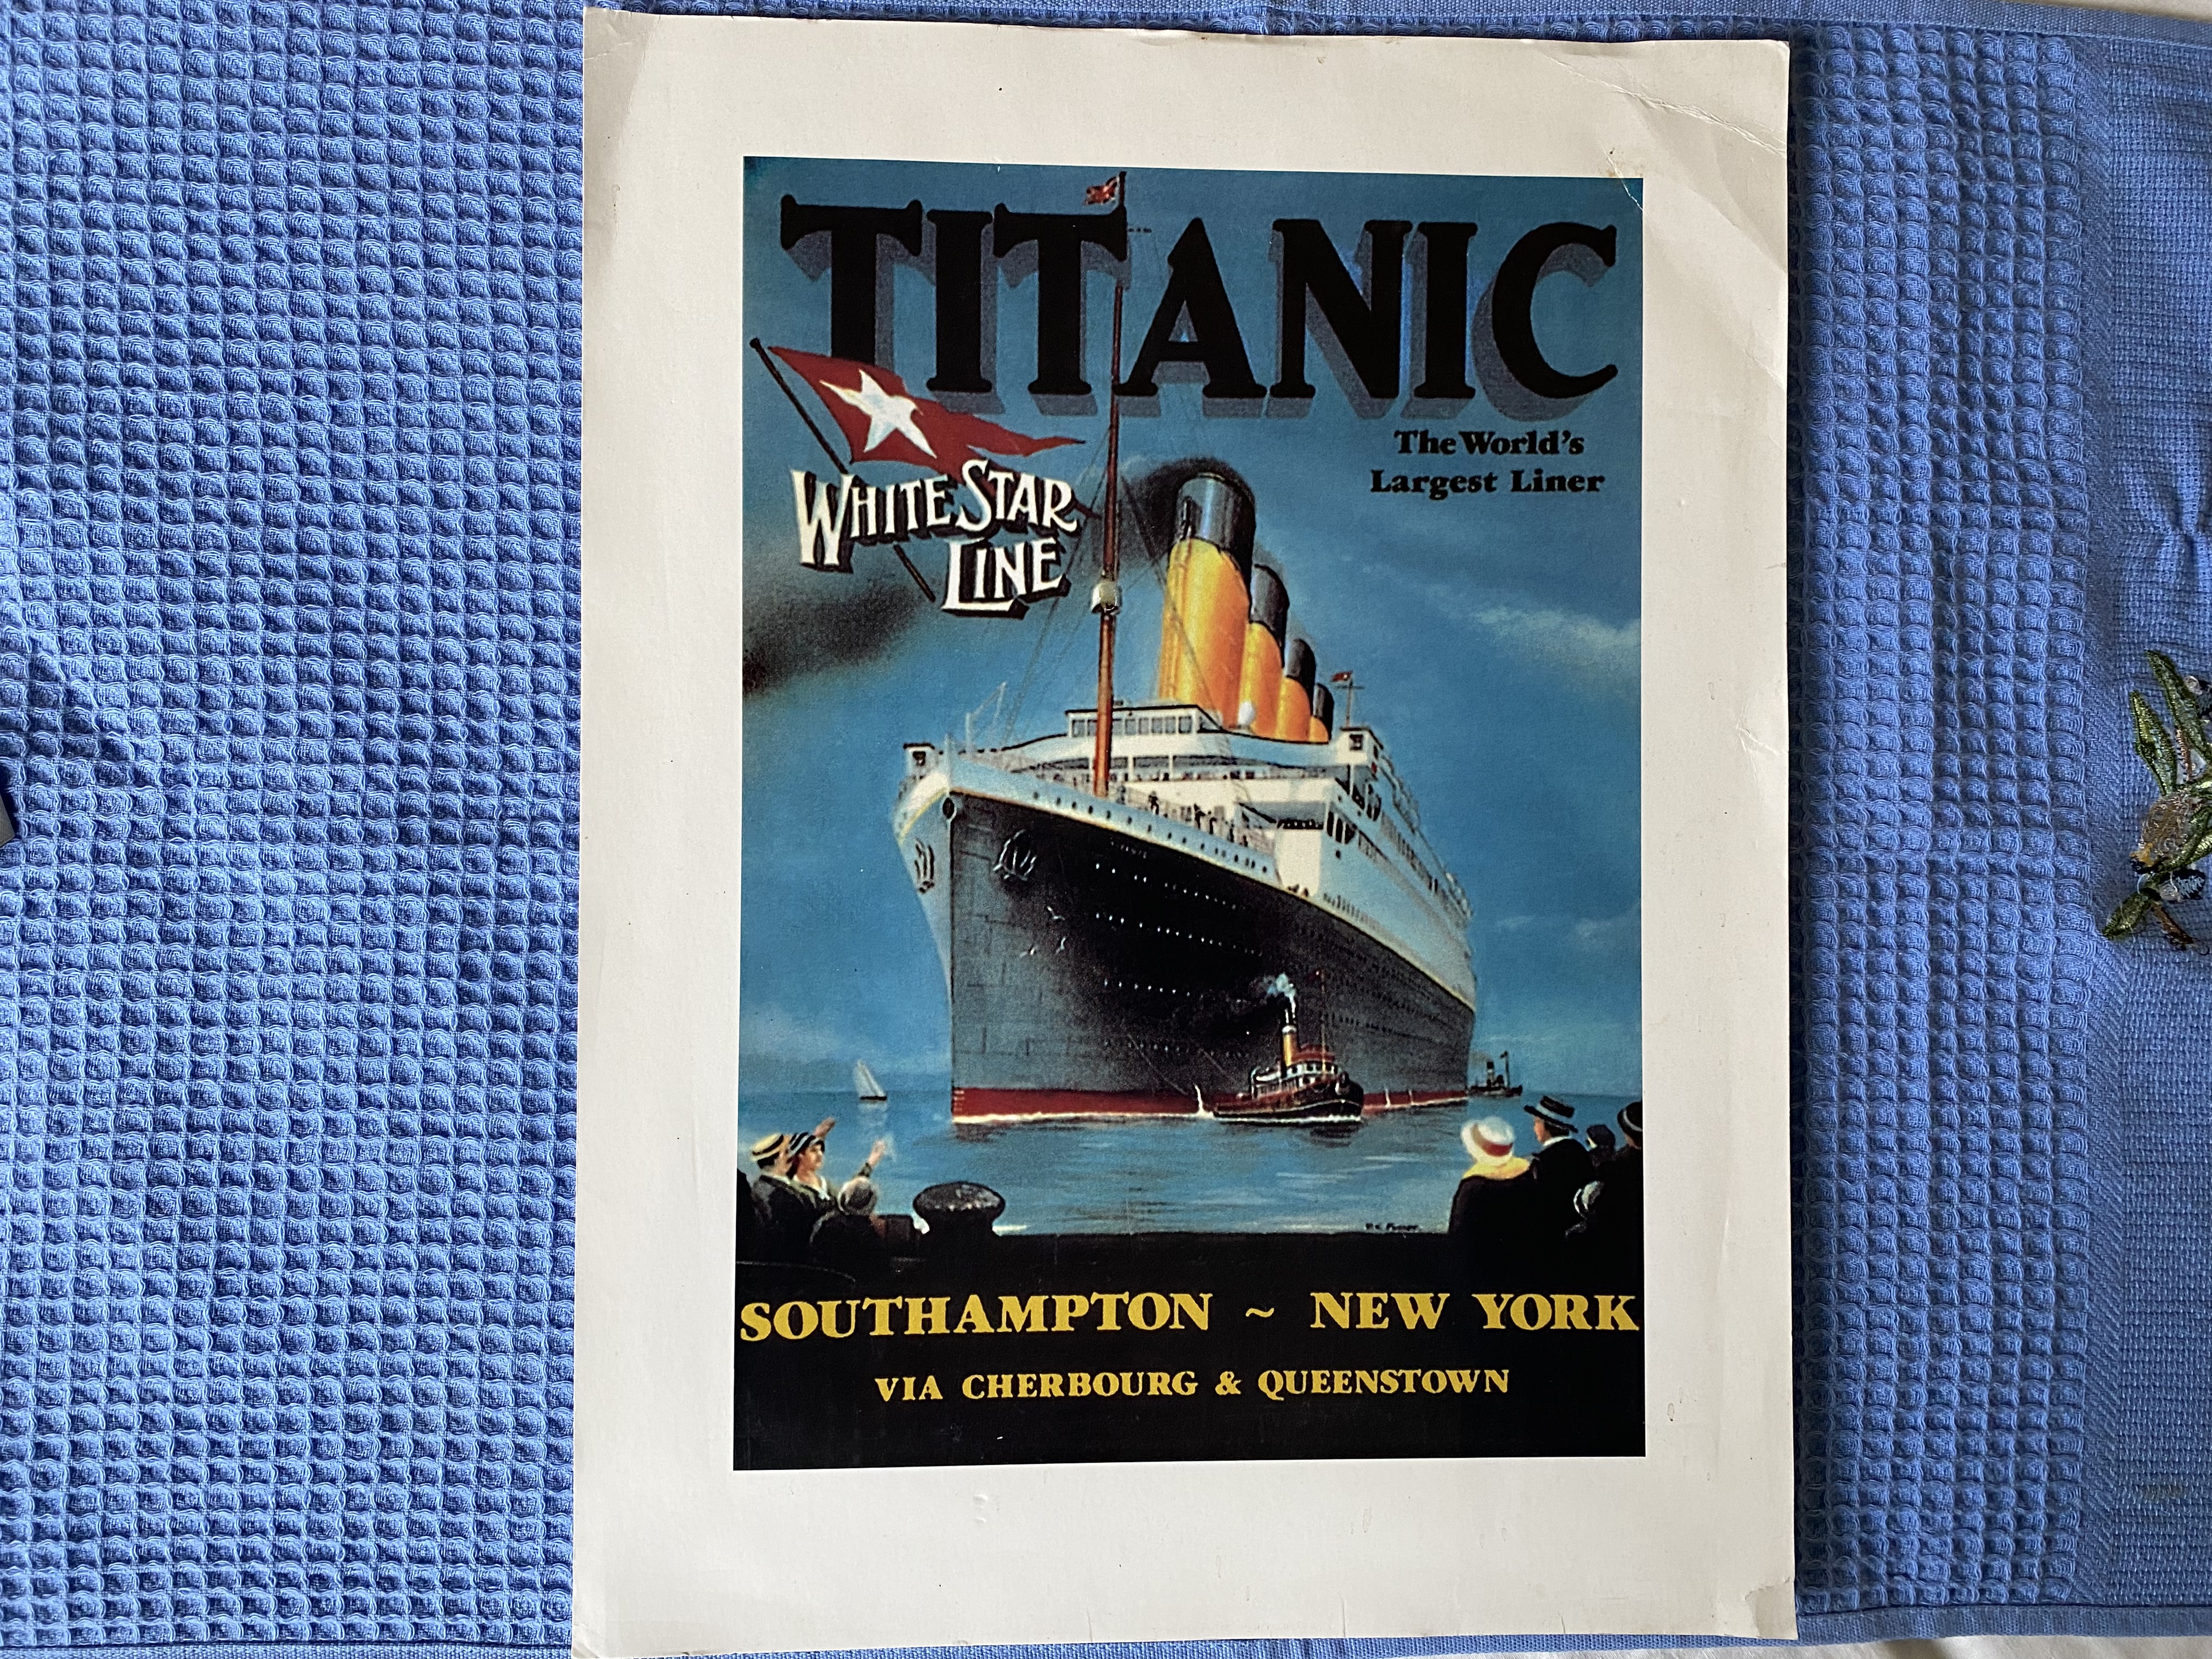 COPY OF AN EARLY ORIGINAL PROMOTIONAL POSTER FOR THE FAMOUS OLD VESSEL THE TITANIC